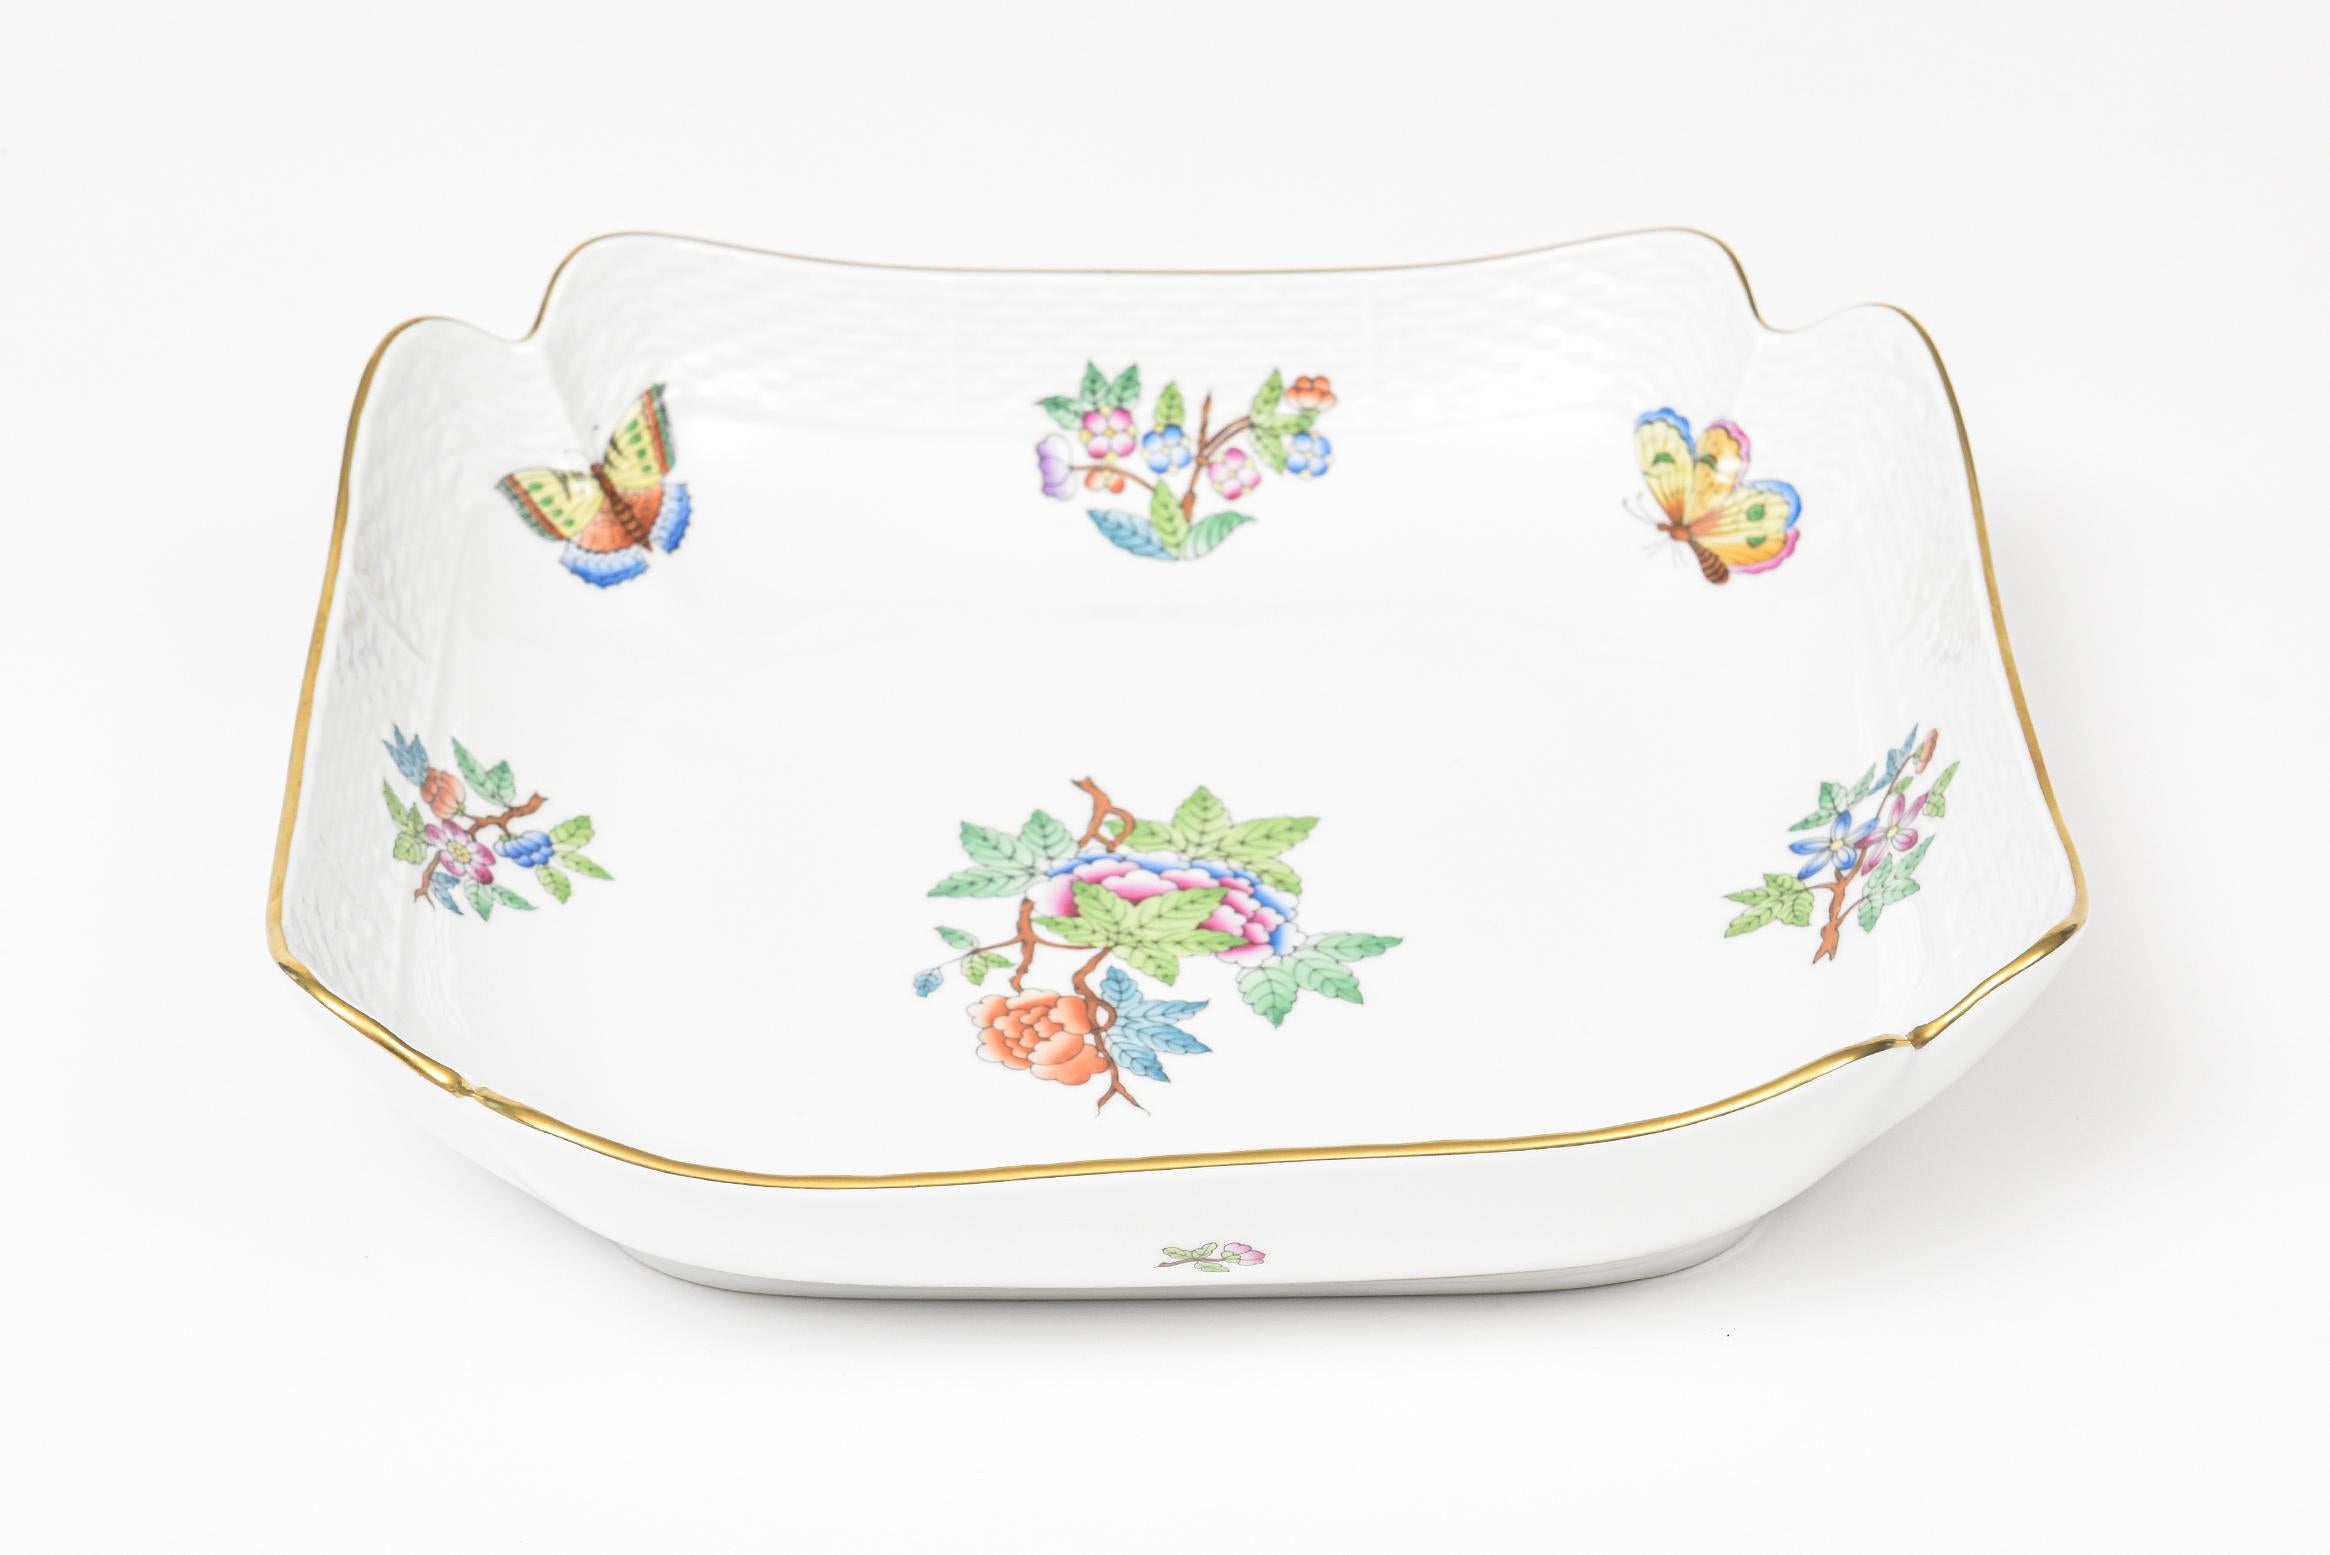 Herend Queen Victoria older shallow square fruit or salad serving bowl.
The original pattern, introduced in 1851 at the First World Exhibition in London, was purchased by Queen Victoria herself. Subsequently named for her, this Chinese-influenced